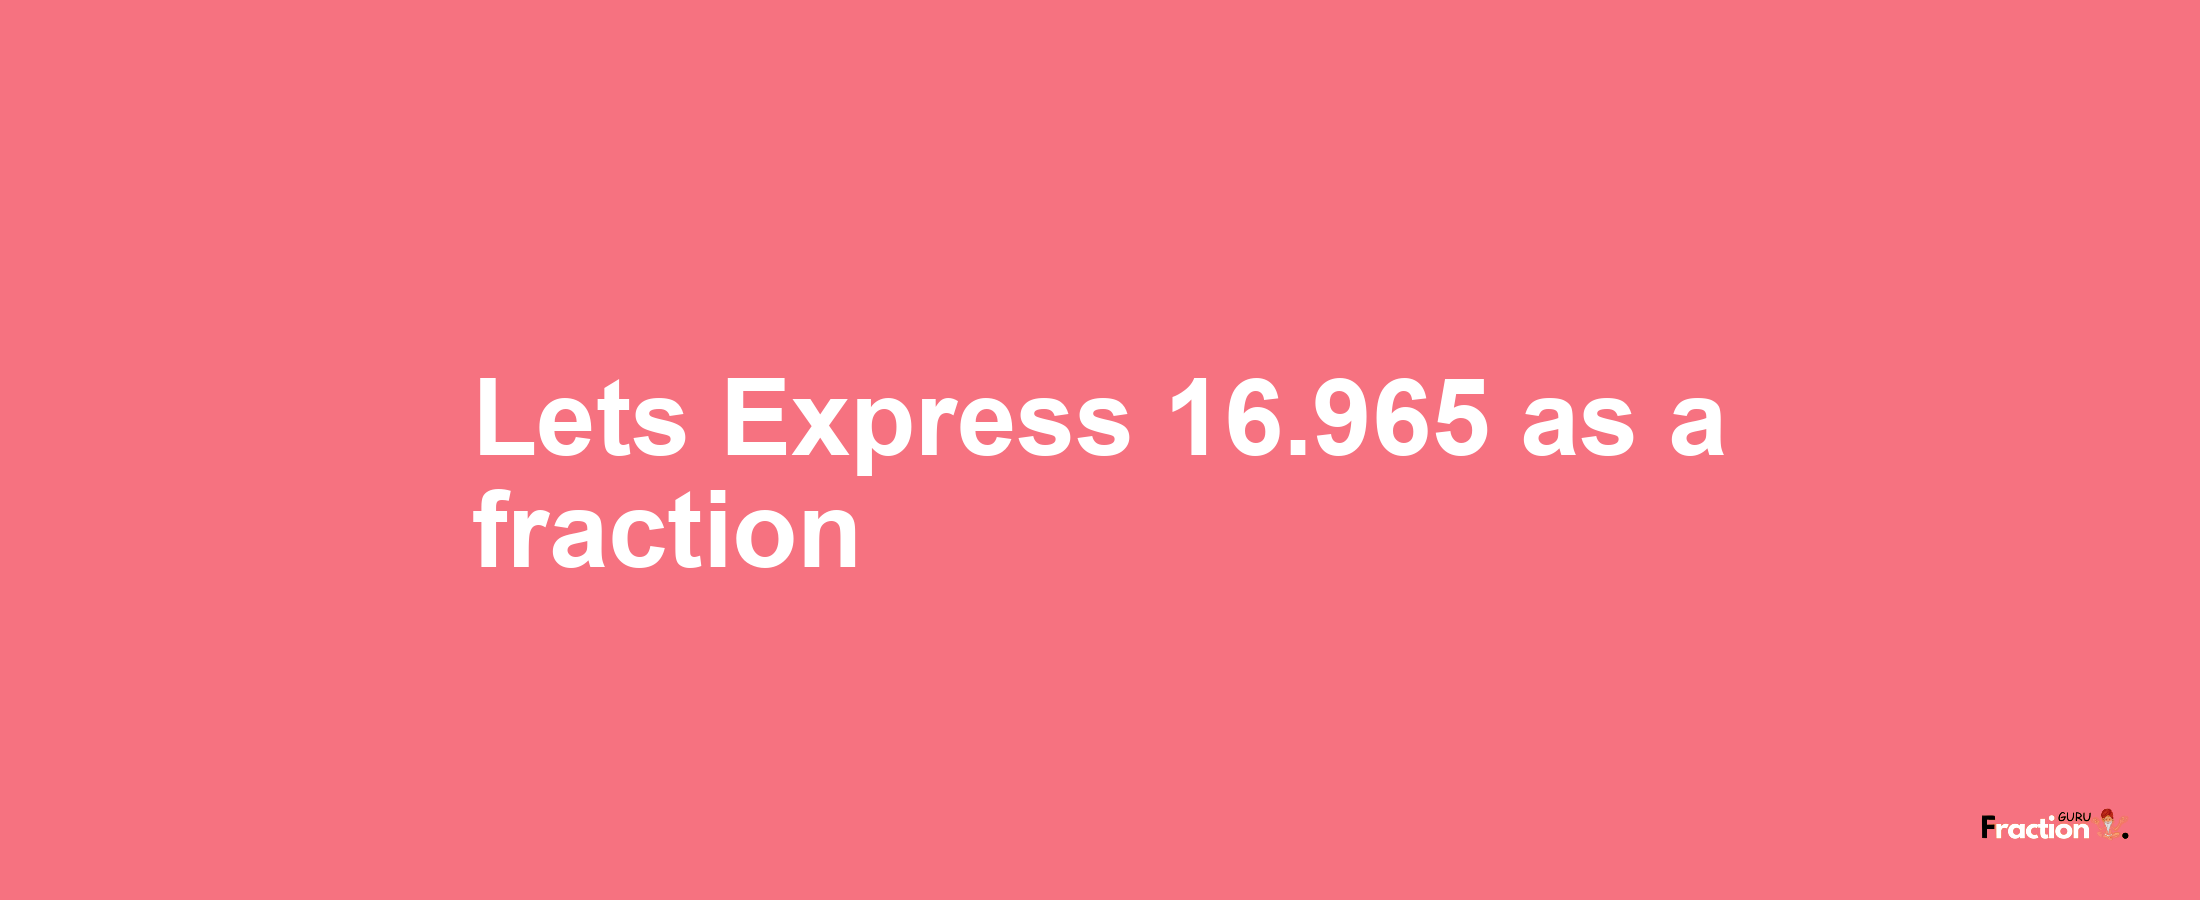 Lets Express 16.965 as afraction